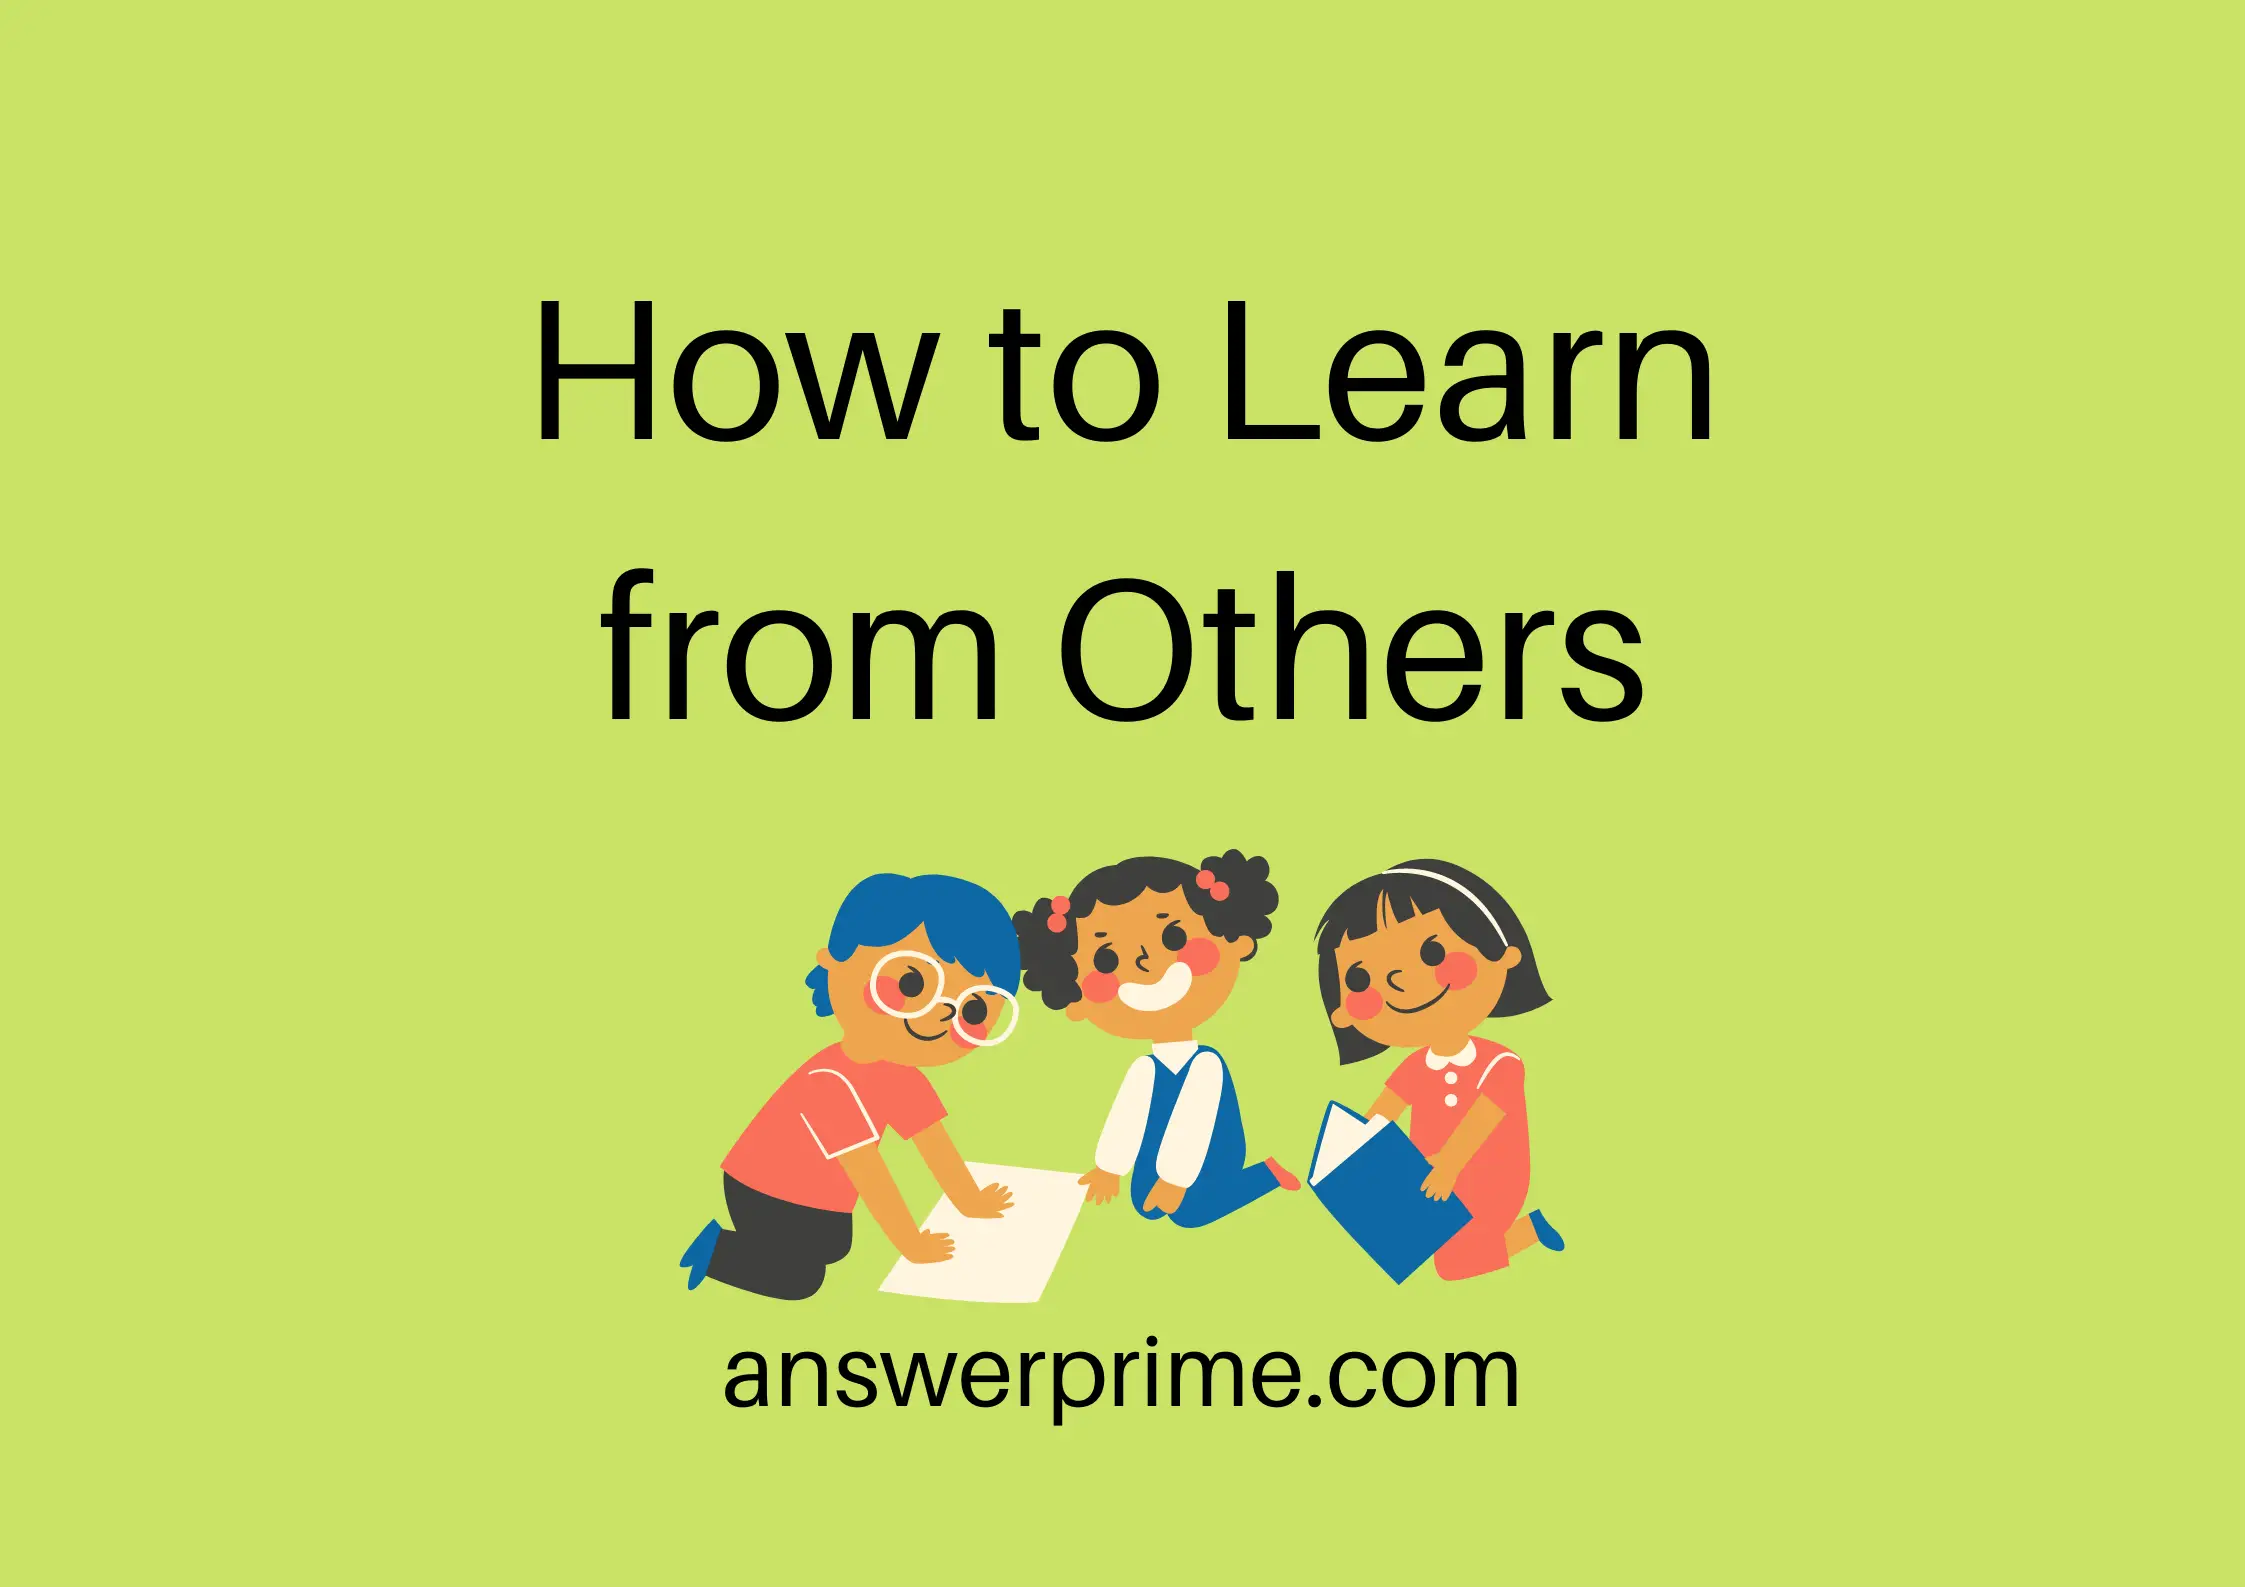 How to Learn from Others